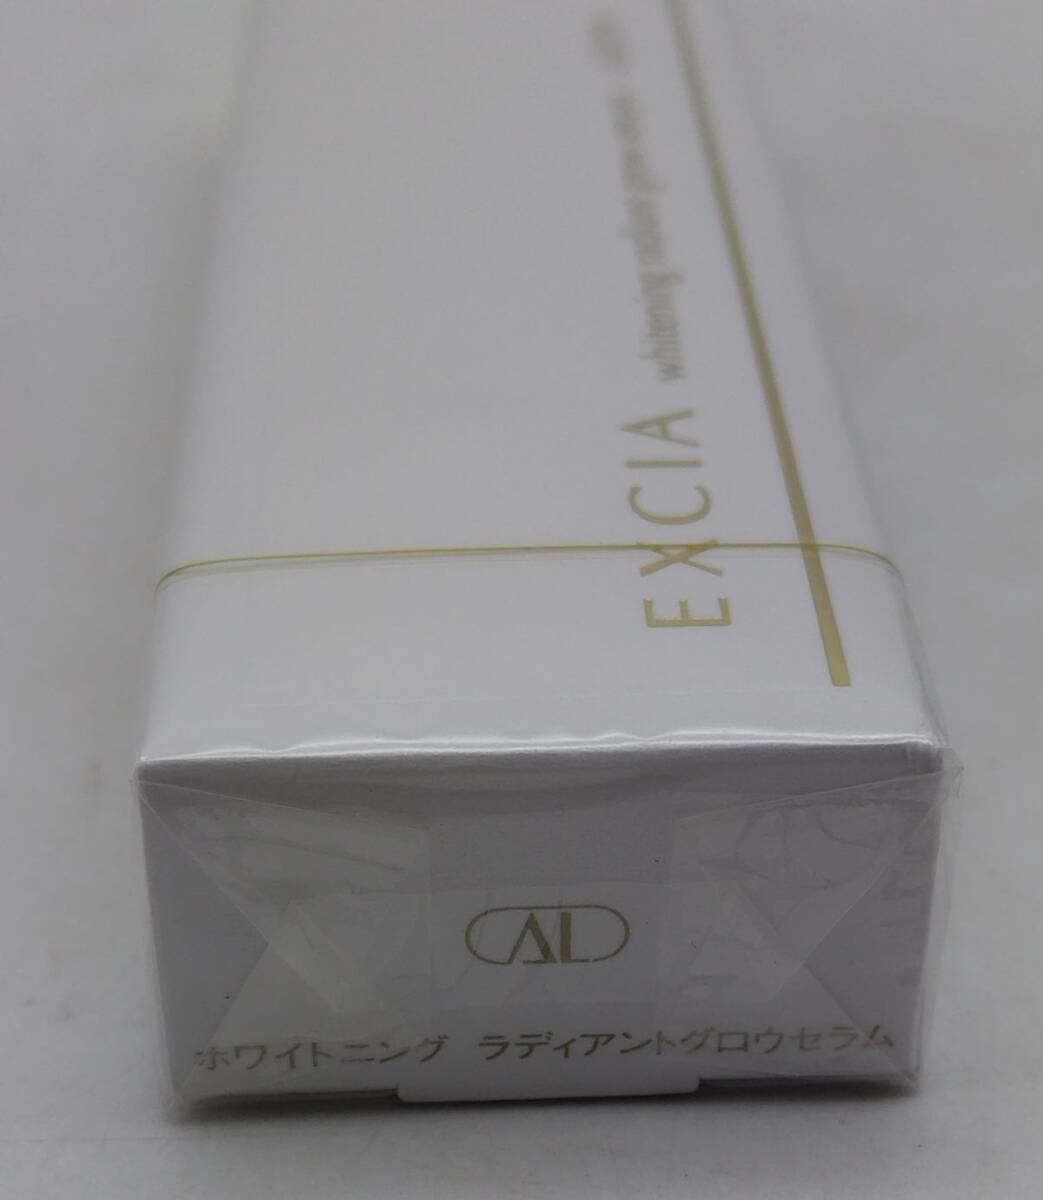 T* new goods unopened Albion e comb aAL whitening lati Anne to Glo u Sera m*